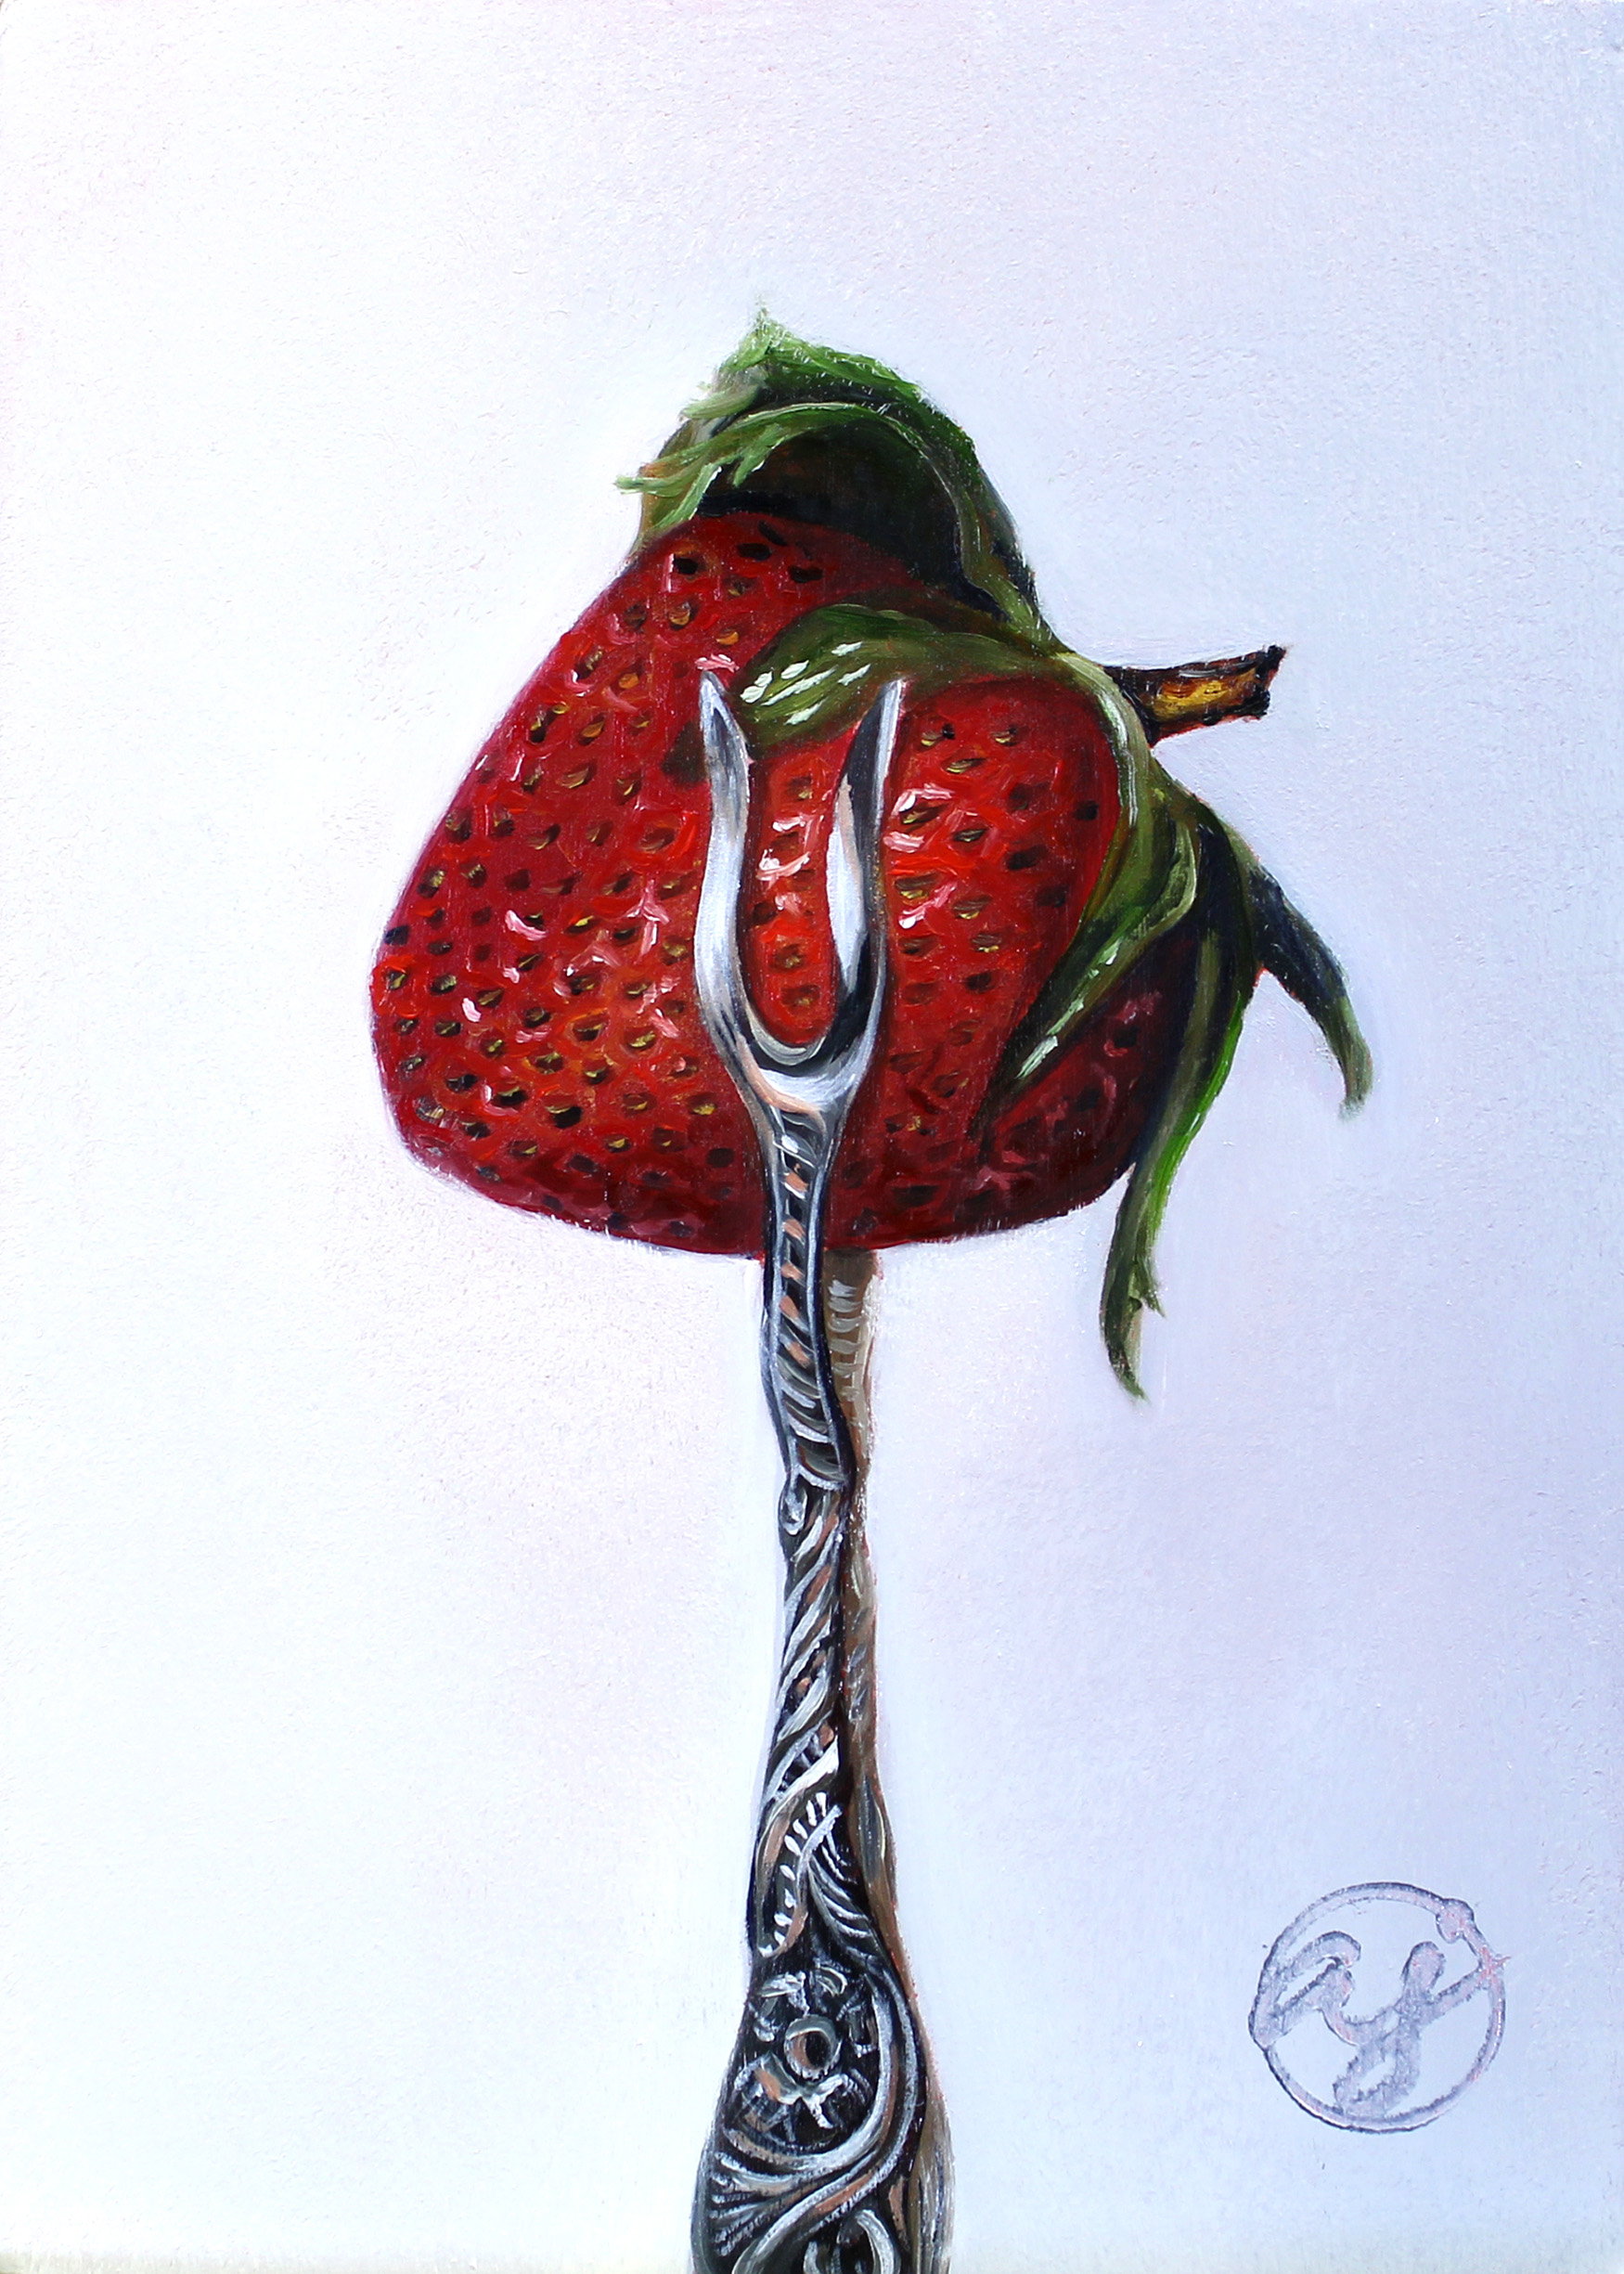 "Put a Fork in it: Strawberry I" 5x7 Original Oil Painting by Abra Johnson